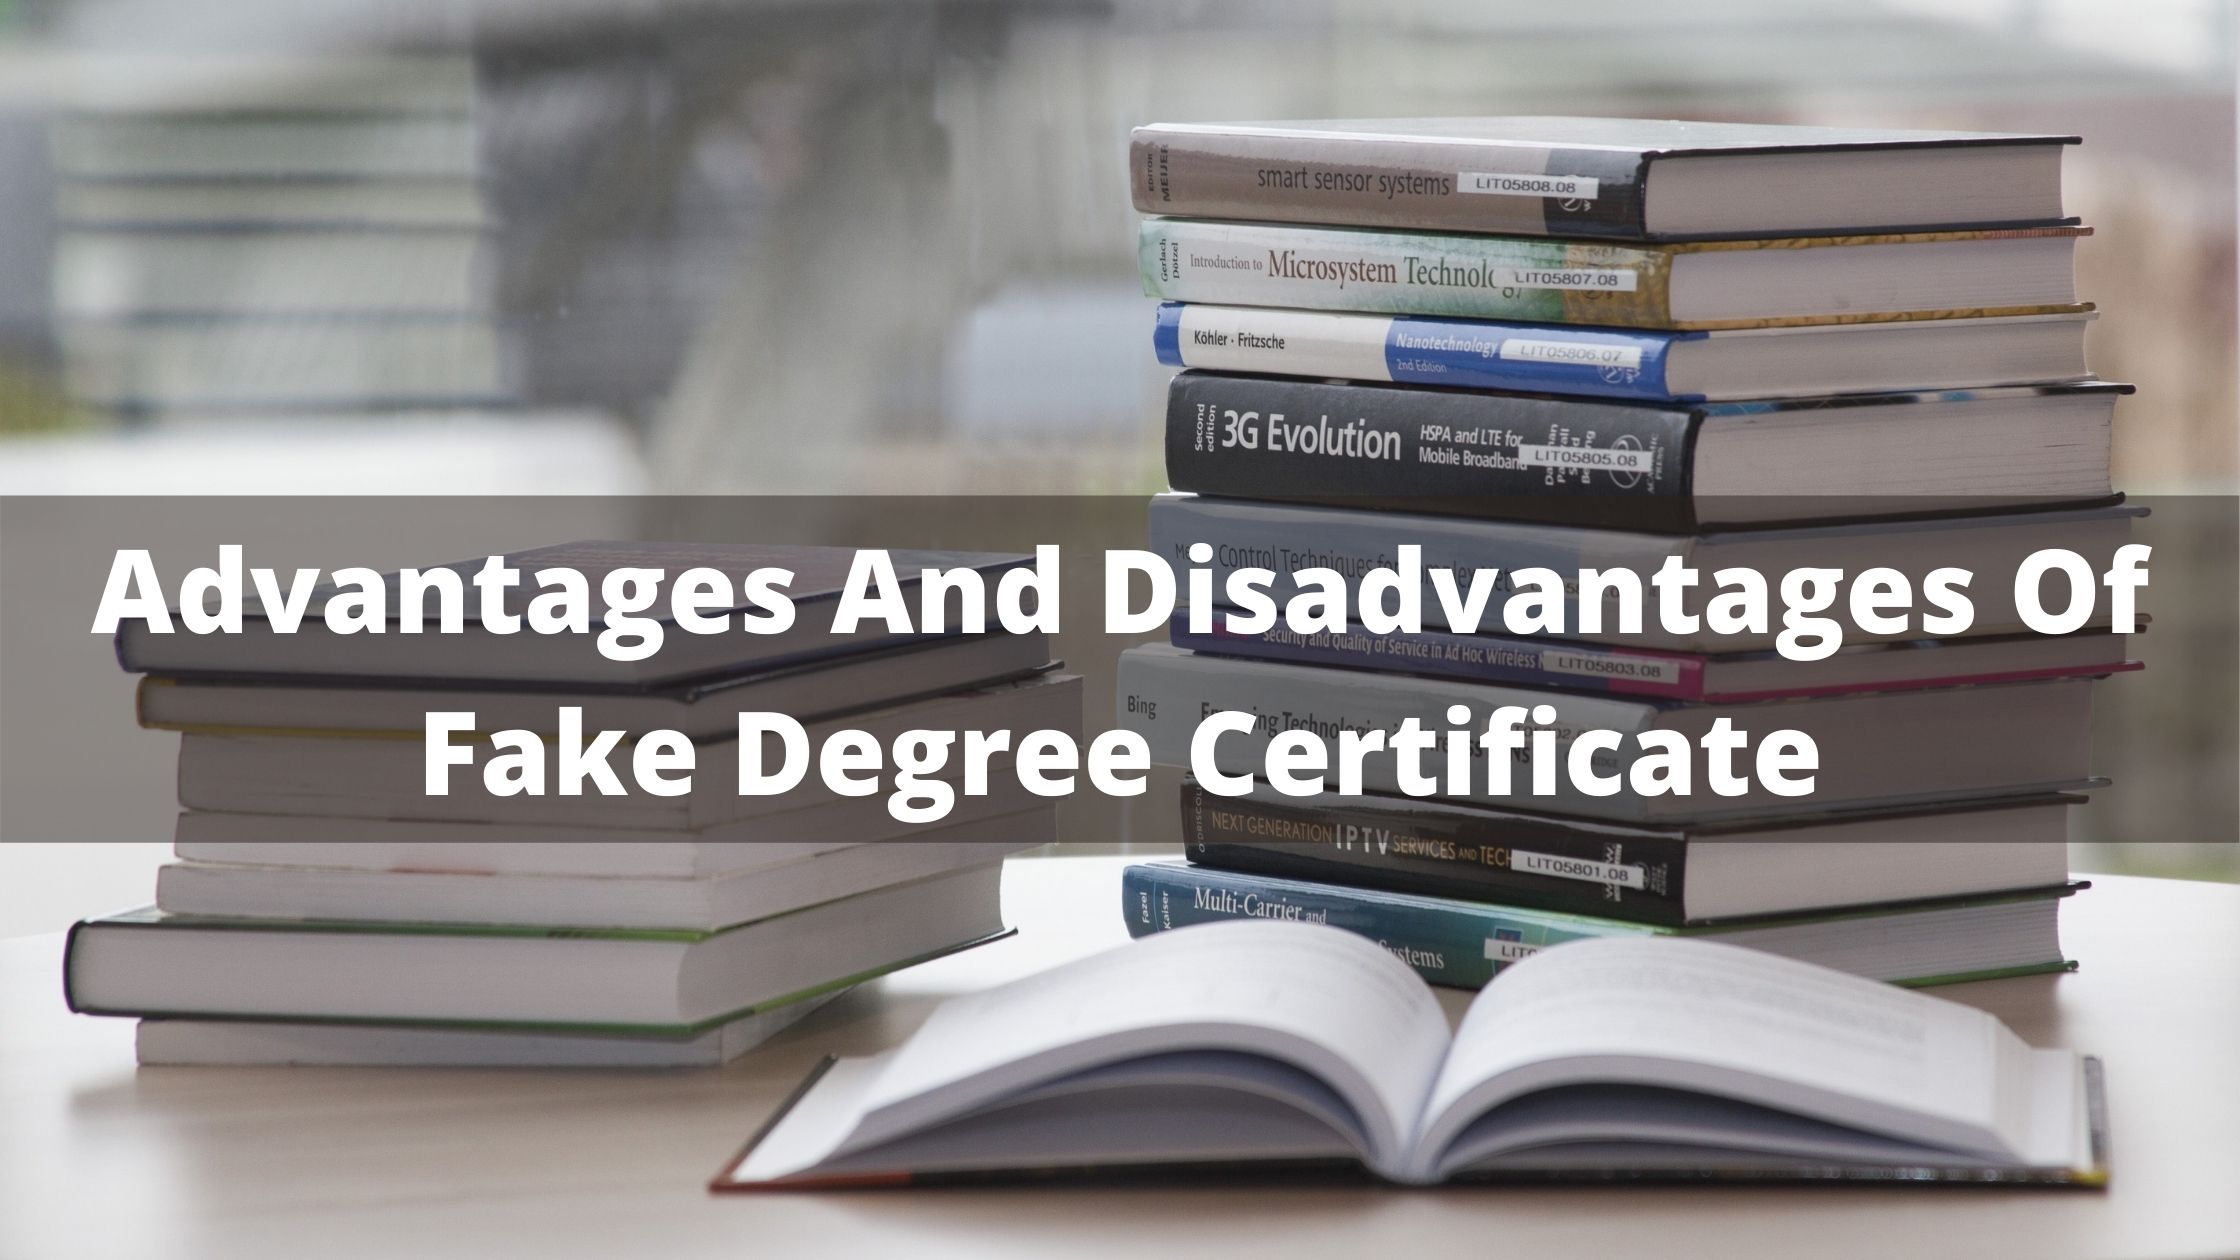 Advantages And Disadvantages Of Fake Degree Certificate